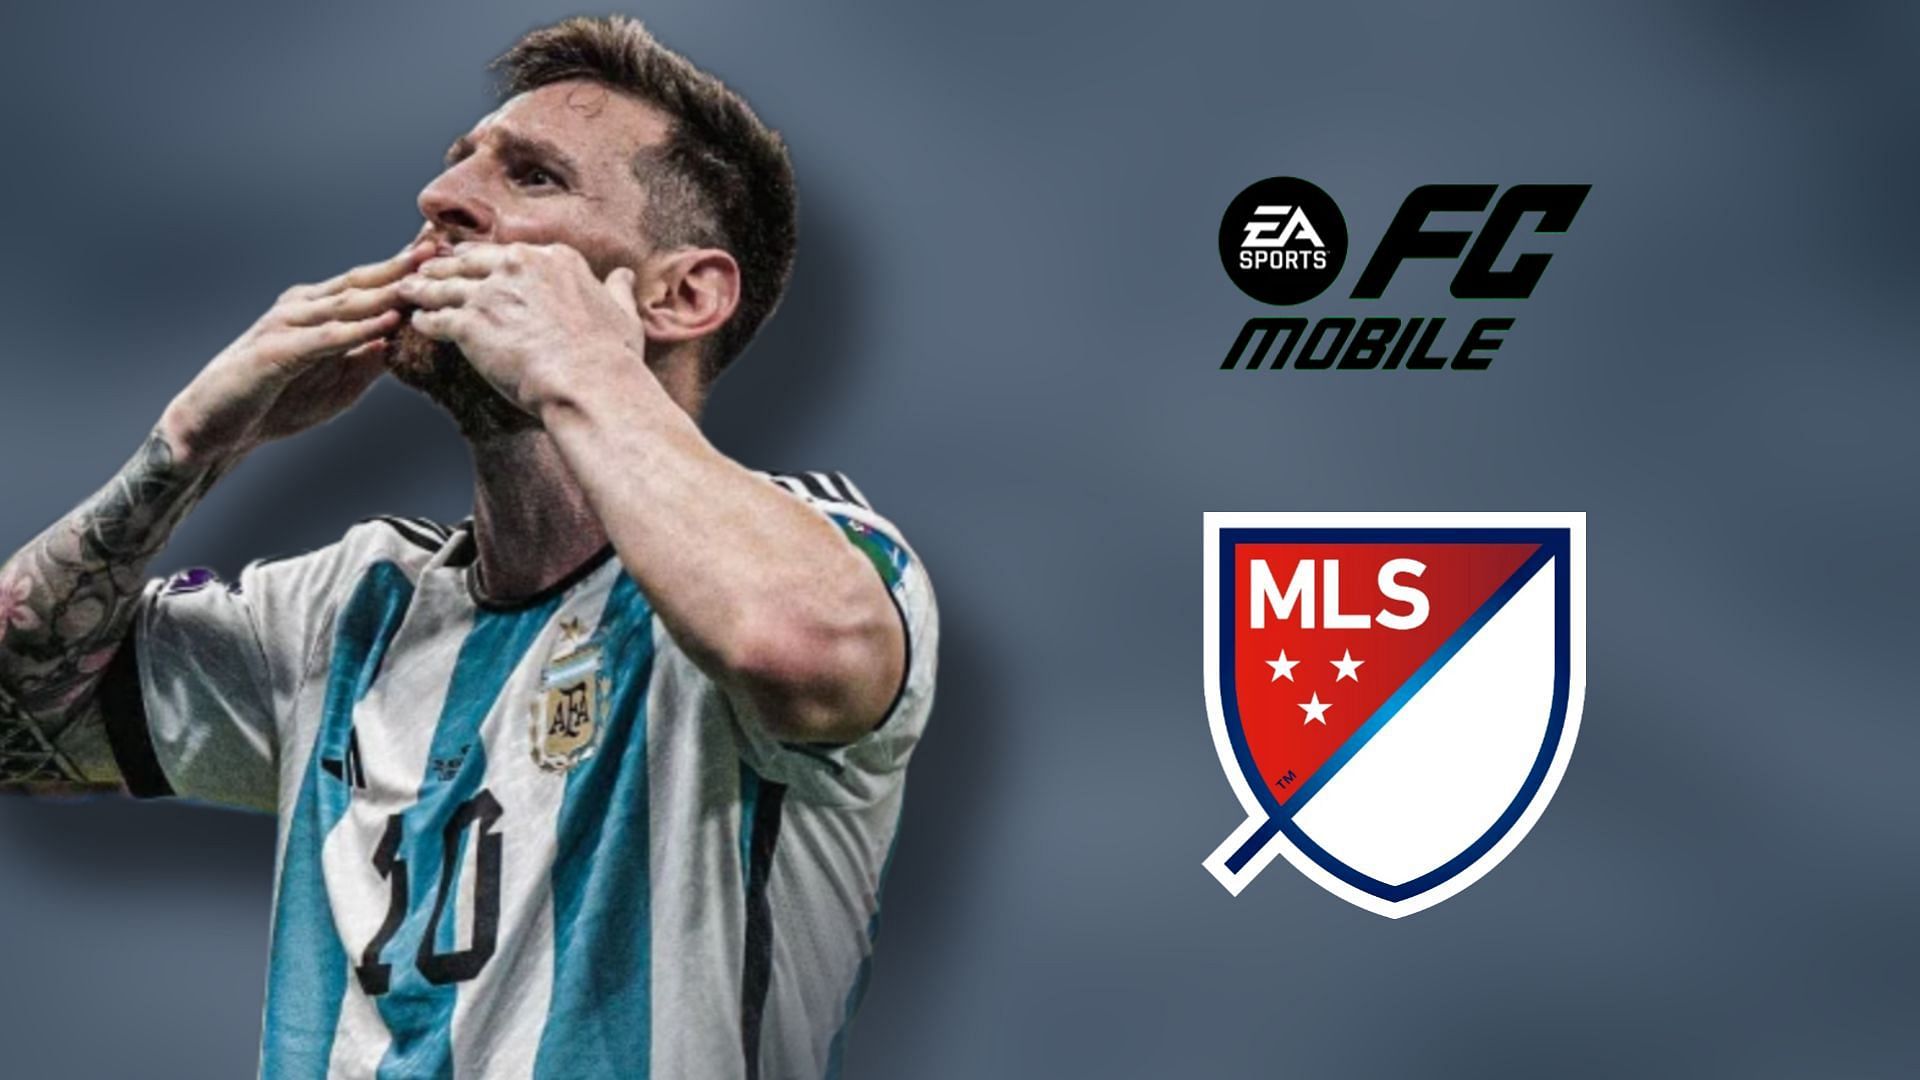 Multiple chapters are added to the FC Mobile MLS promo (Image via Sportskeeda) 